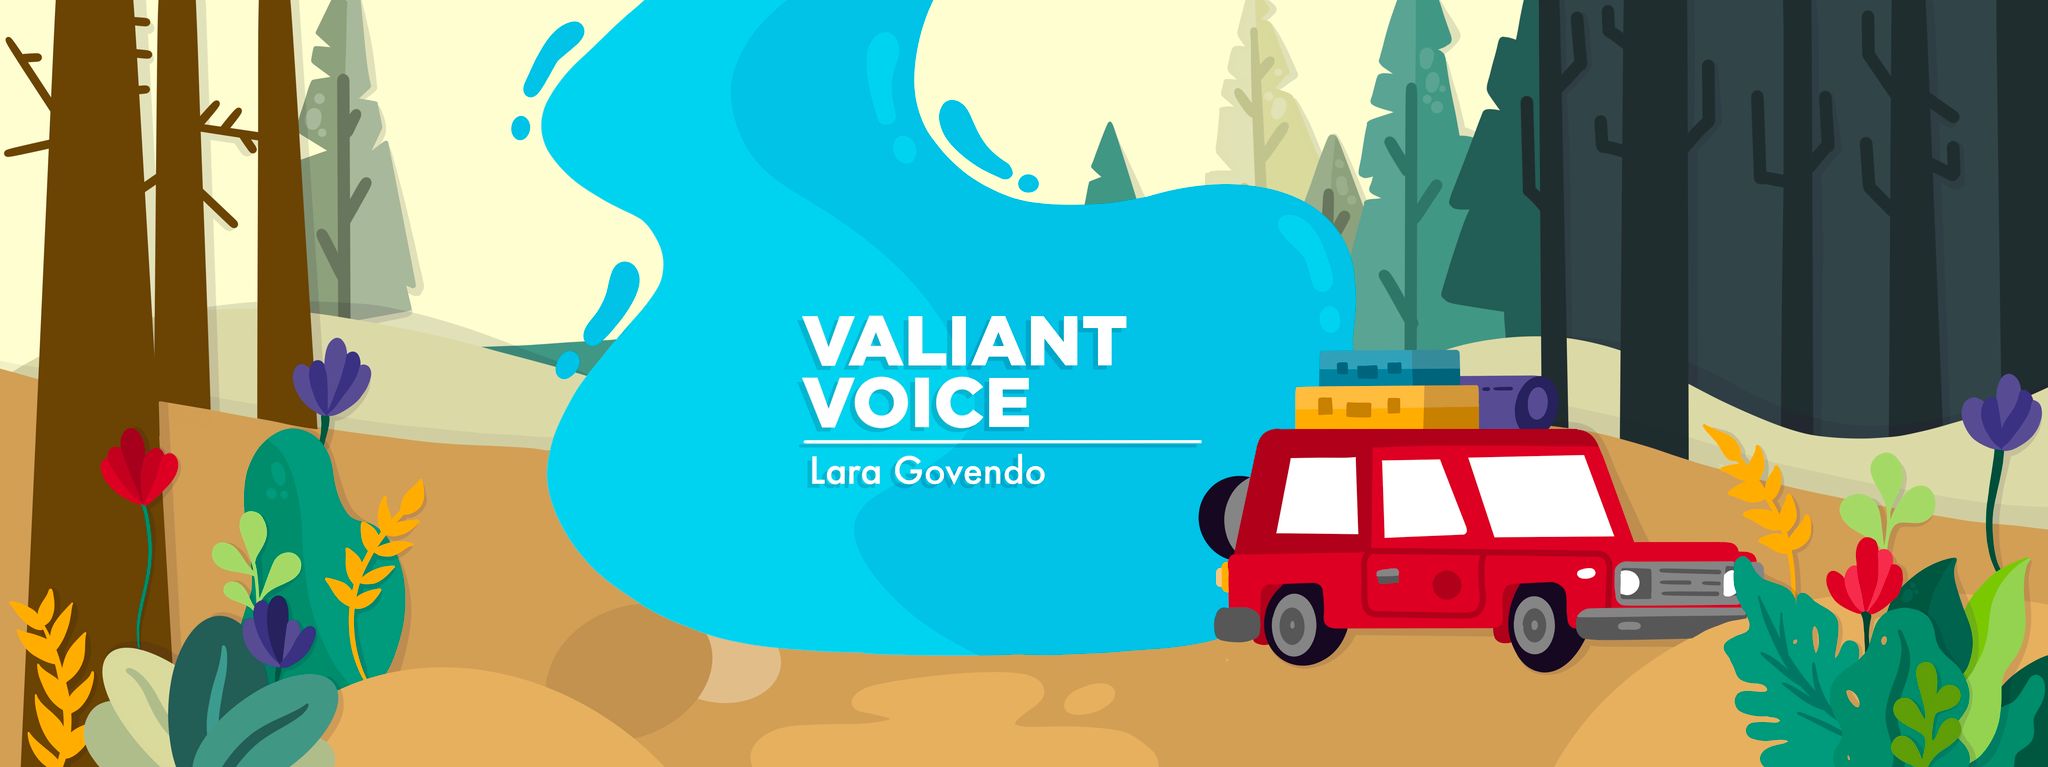 how to cope with loneliness | Cystic Fibrosis Awareness Month | Cystic Fibrosis News Today | A banner for Lara Govendo's column, depicting a car on a road trip winding through a forest